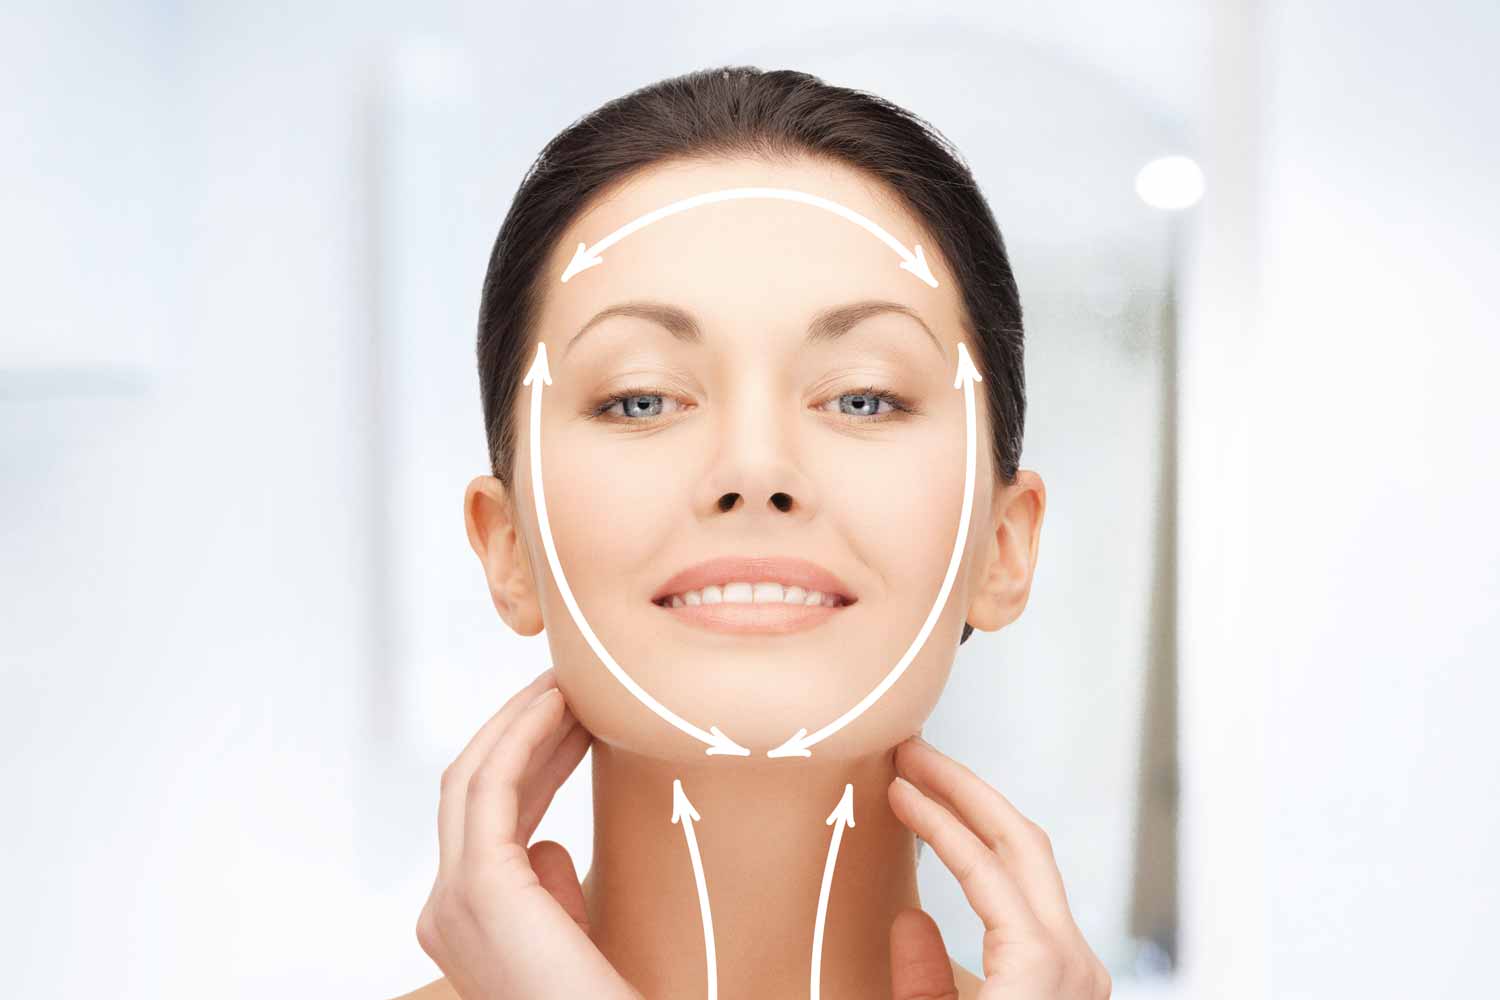 Endopeel method can be used in non-surgical facelift #1